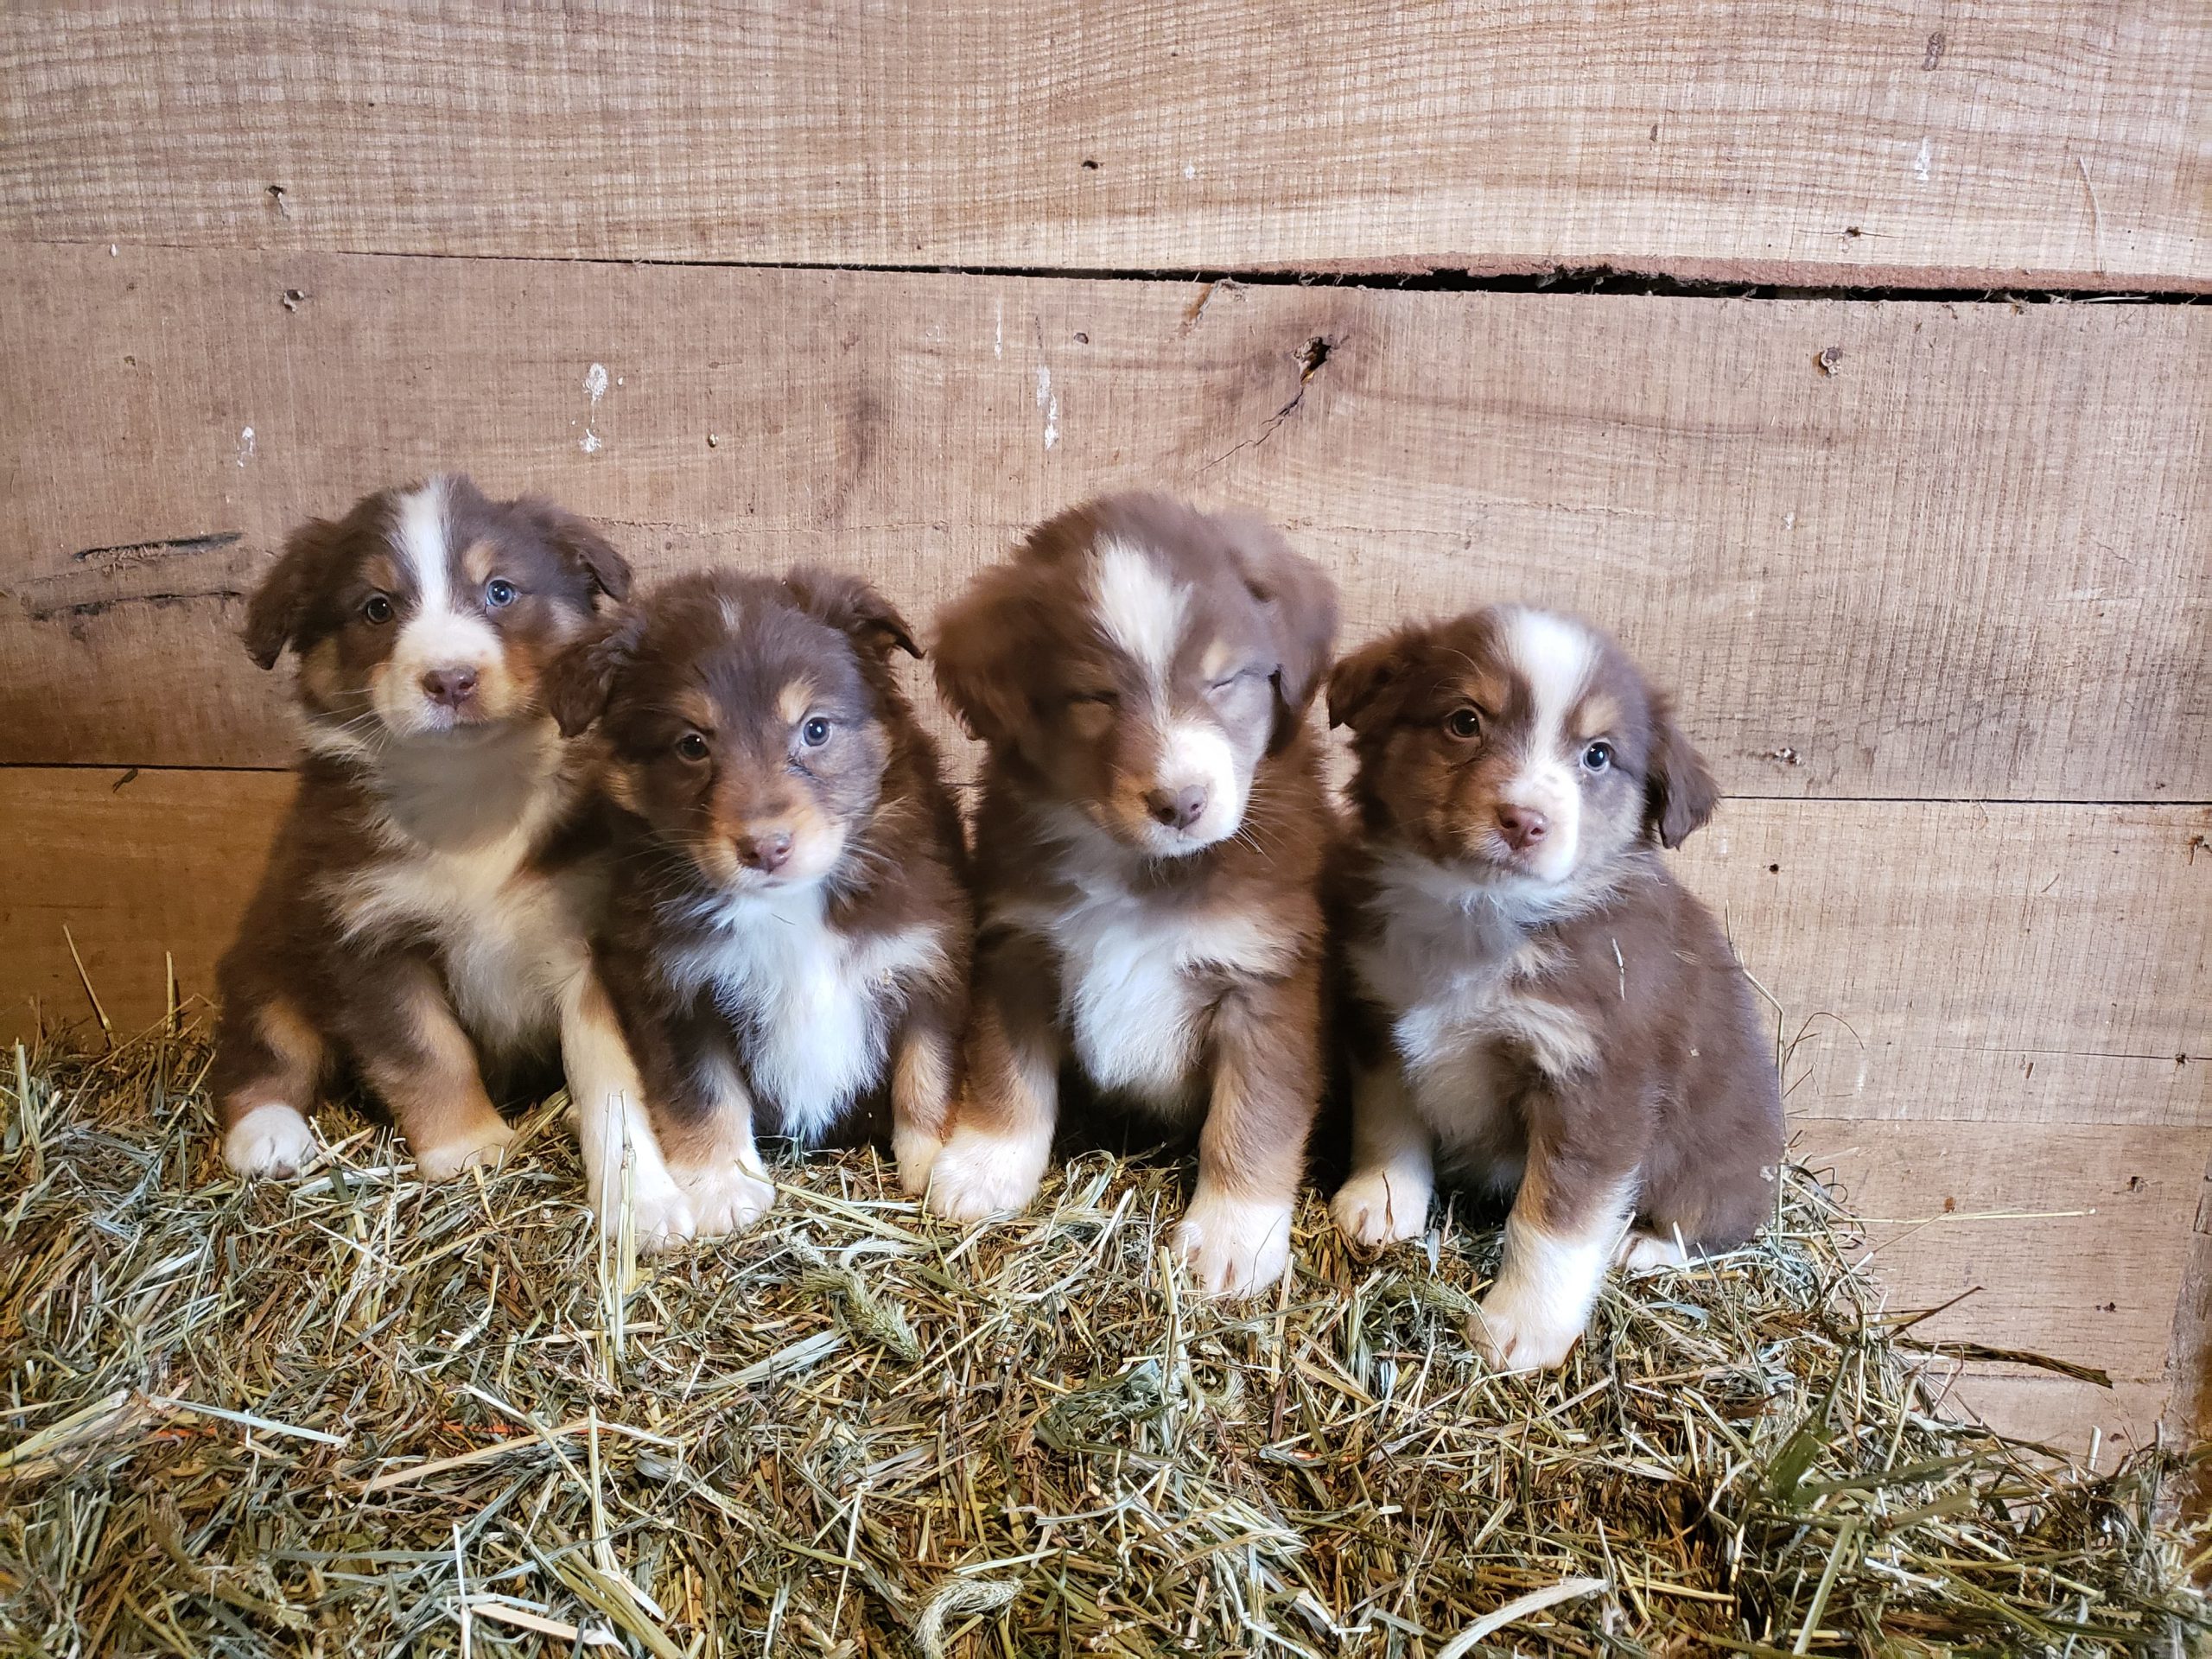 Check Out Our Available Puppies!